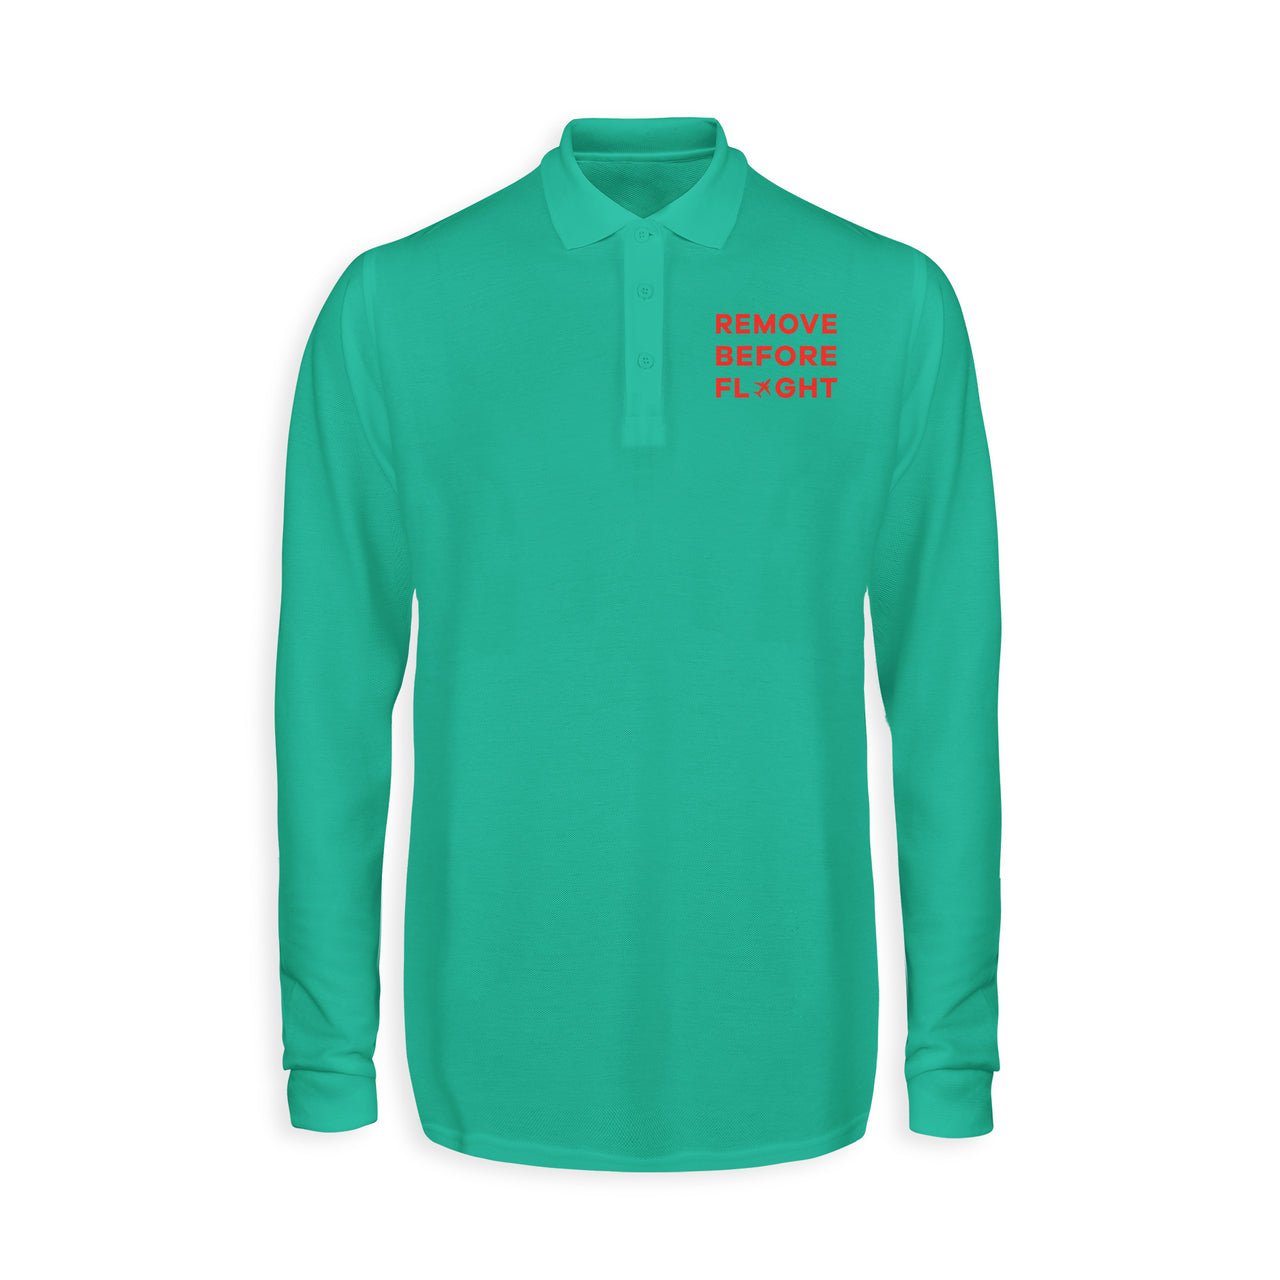 Remove Before Flight Designed Long Sleeve Polo T-Shirts